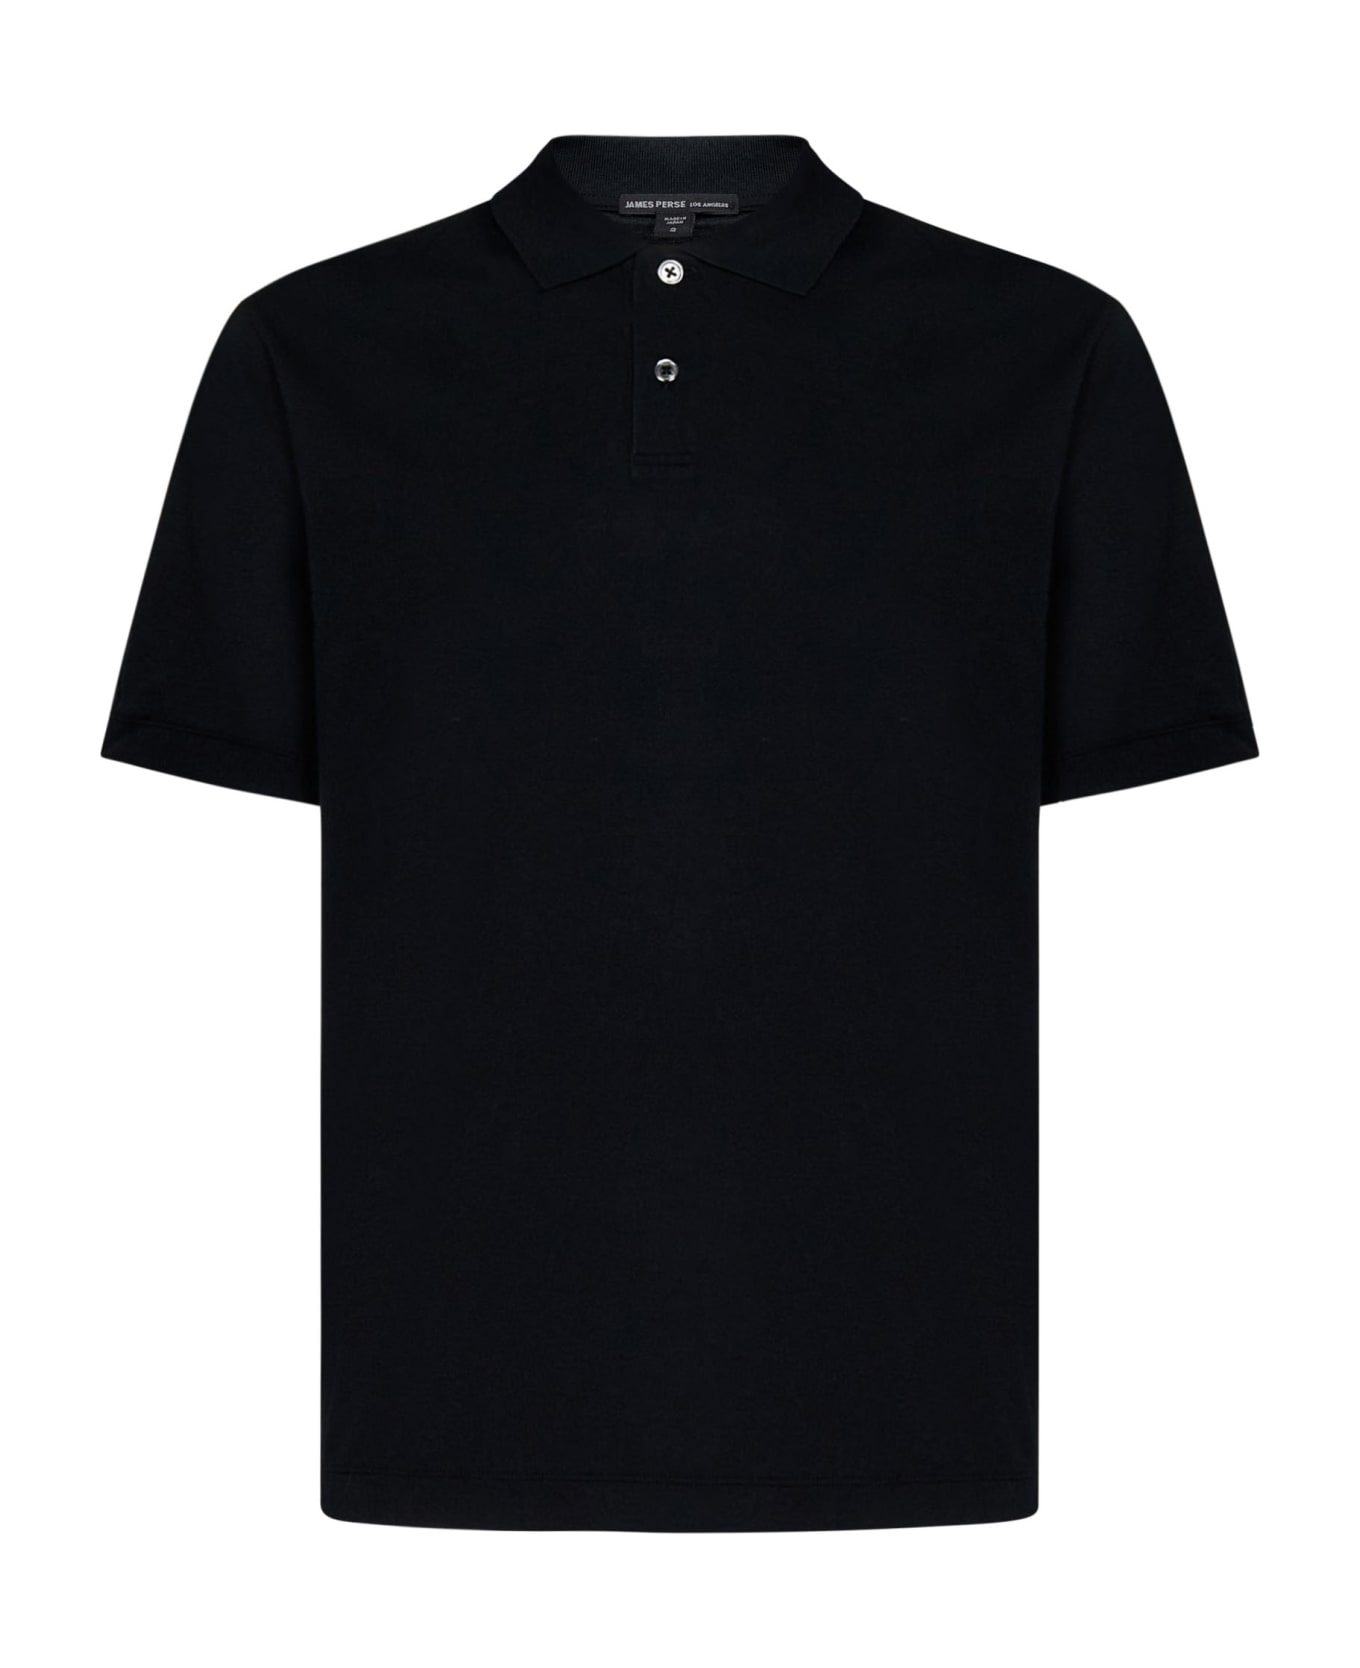 James Perse Luxe Lotus Jersey Polo Shirt - Black